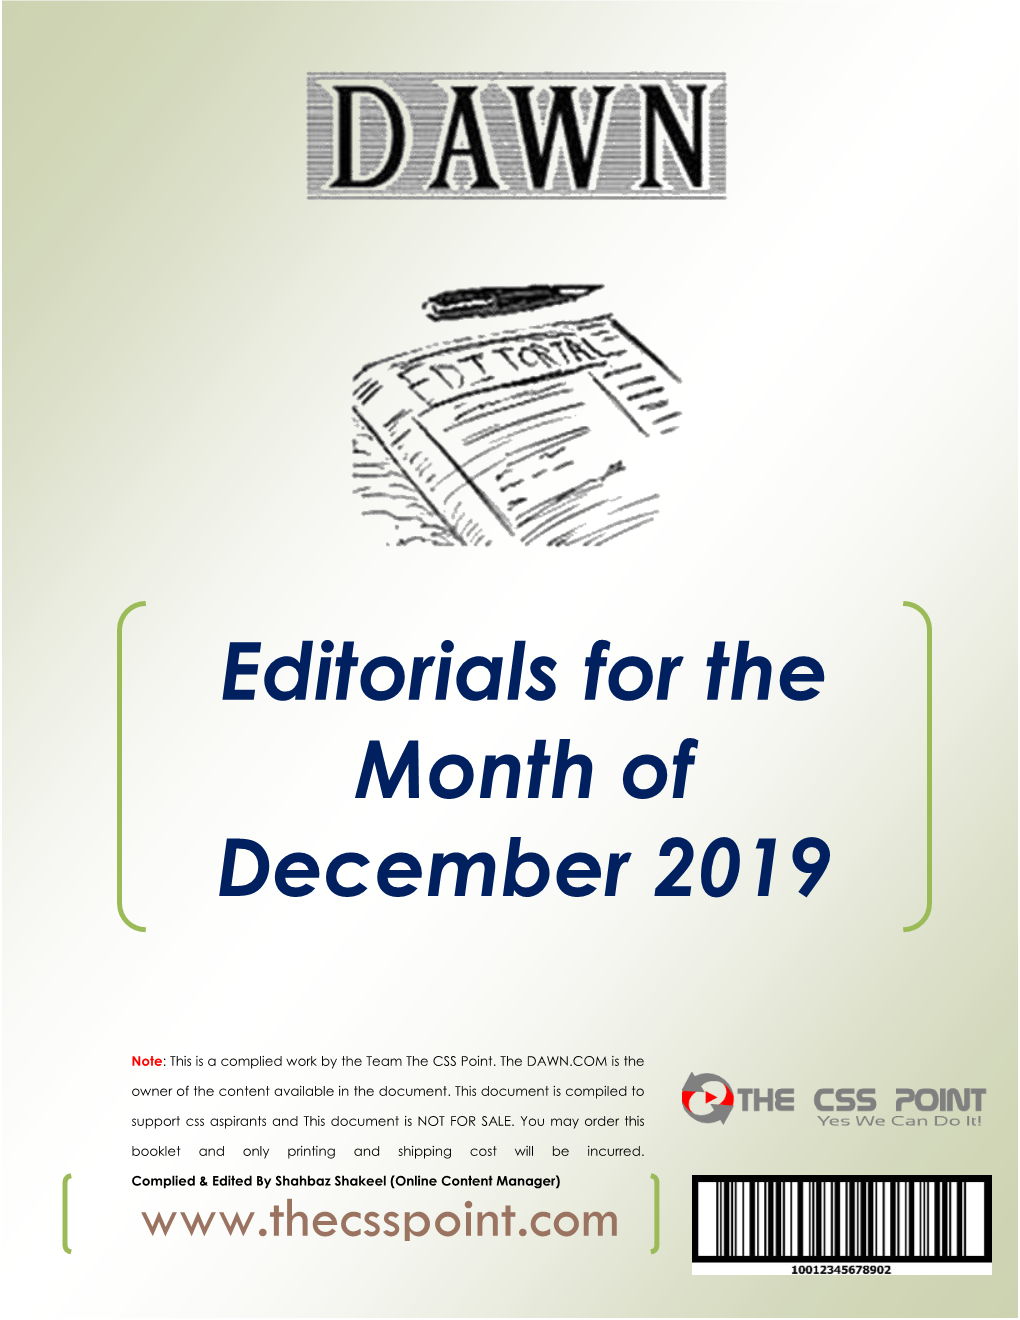 Editorials for the Month of December 2019